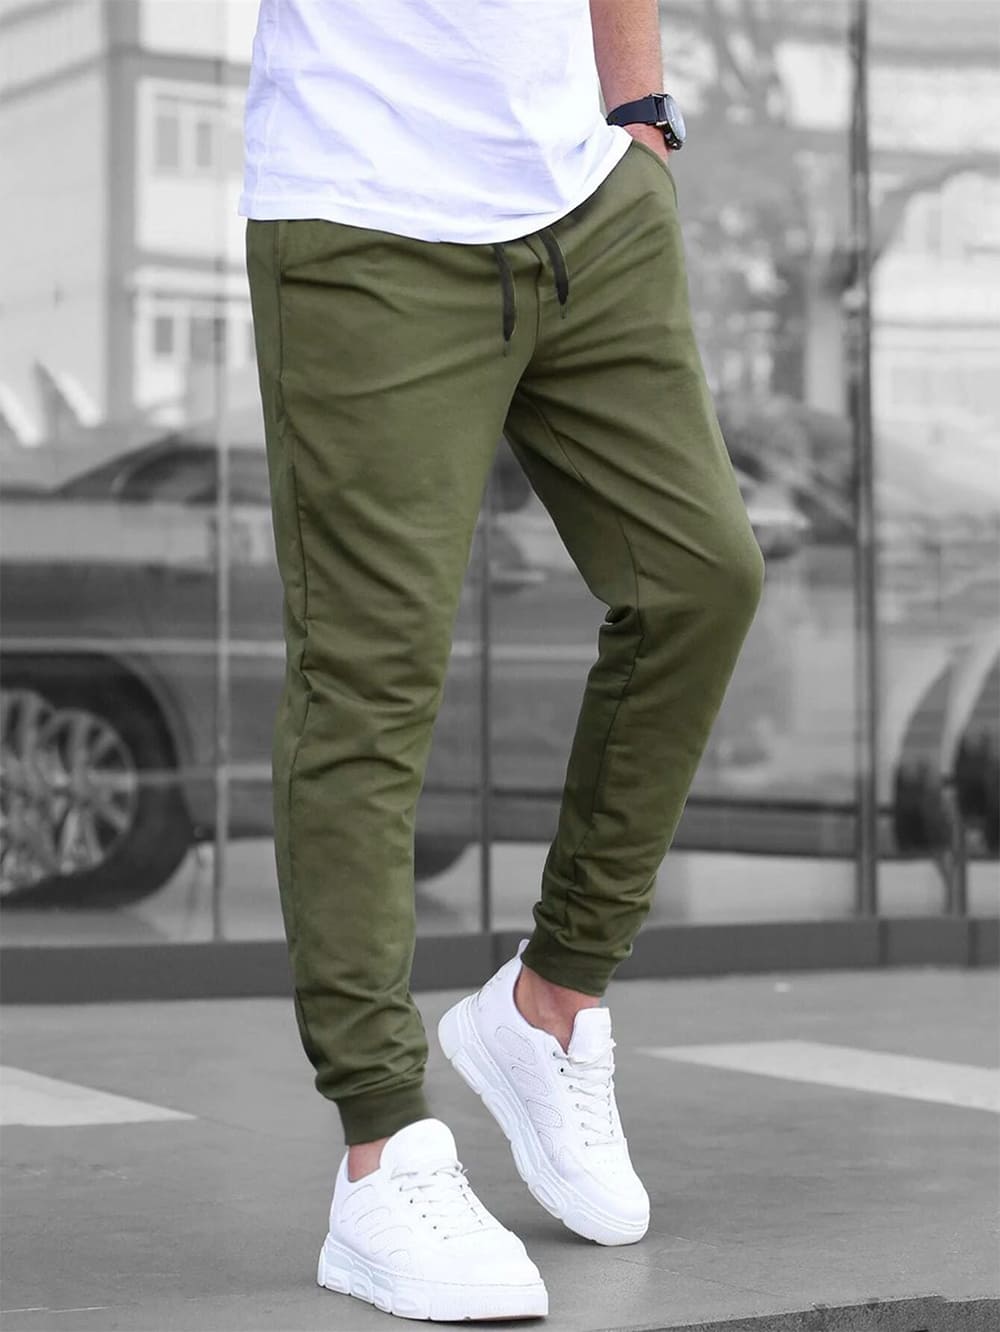 15 Olive Green Pant Outfit Ideas For Women (Comfy & Stylish) | Green pants  outfit, Olive green pants, Ol… | Olive green pants outfit, Olive green pants,  Olive pants